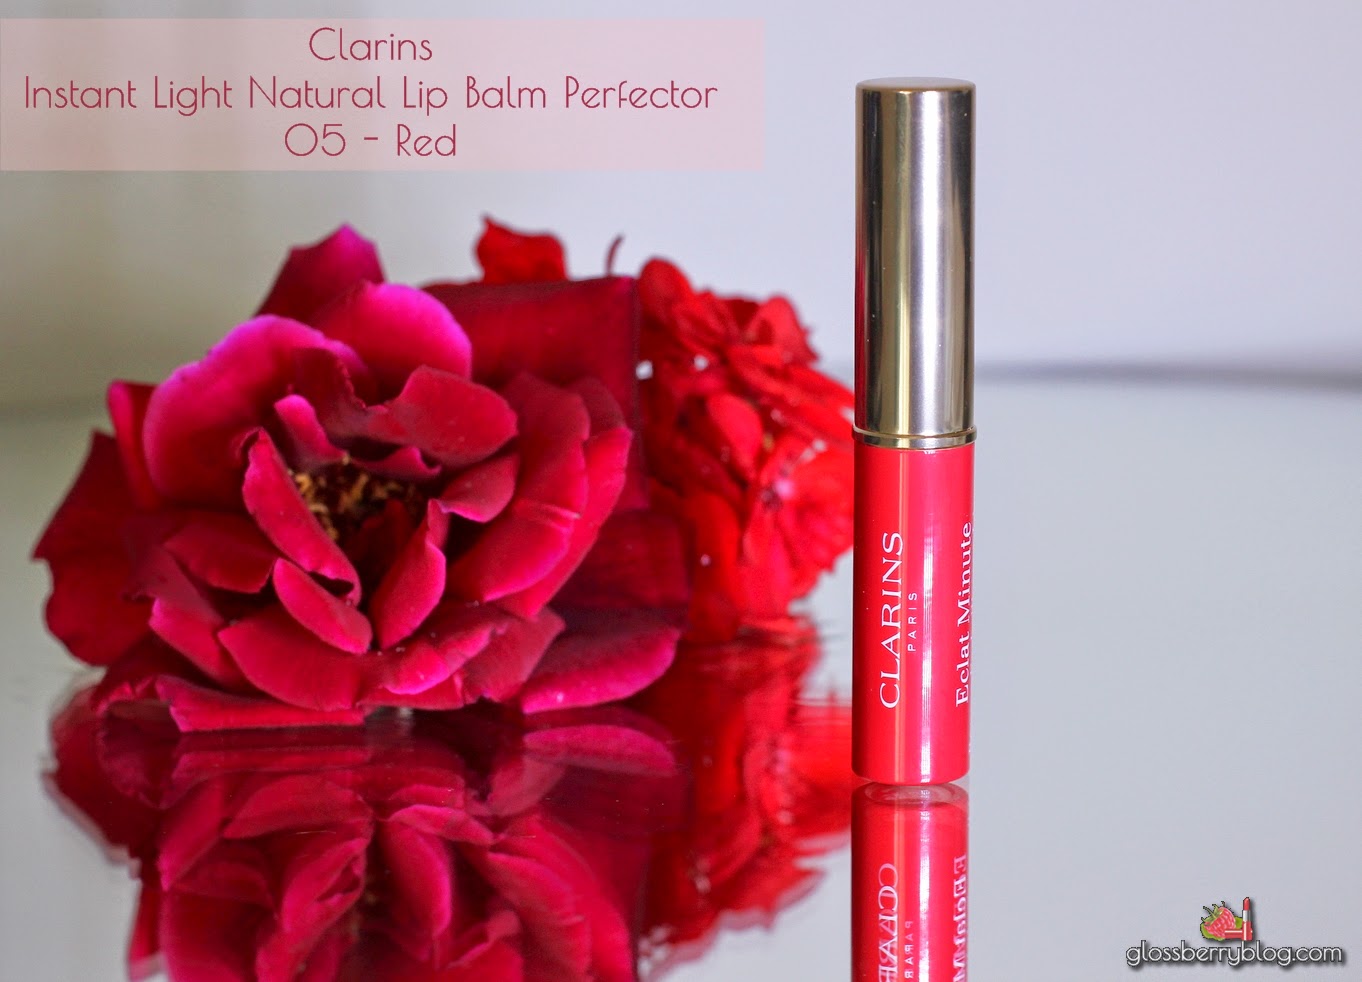 Clarins Instant Light Natural Lip Balm Perfector - 05 - Red - Review and Swatches glossberry blog eclat minute beauty blog lips lipswatches sheer colors 5 red baume on lipswatch swatches גלוסברי בלוג איפור קלרינס שפתון באלם איפור המלצה recommendations